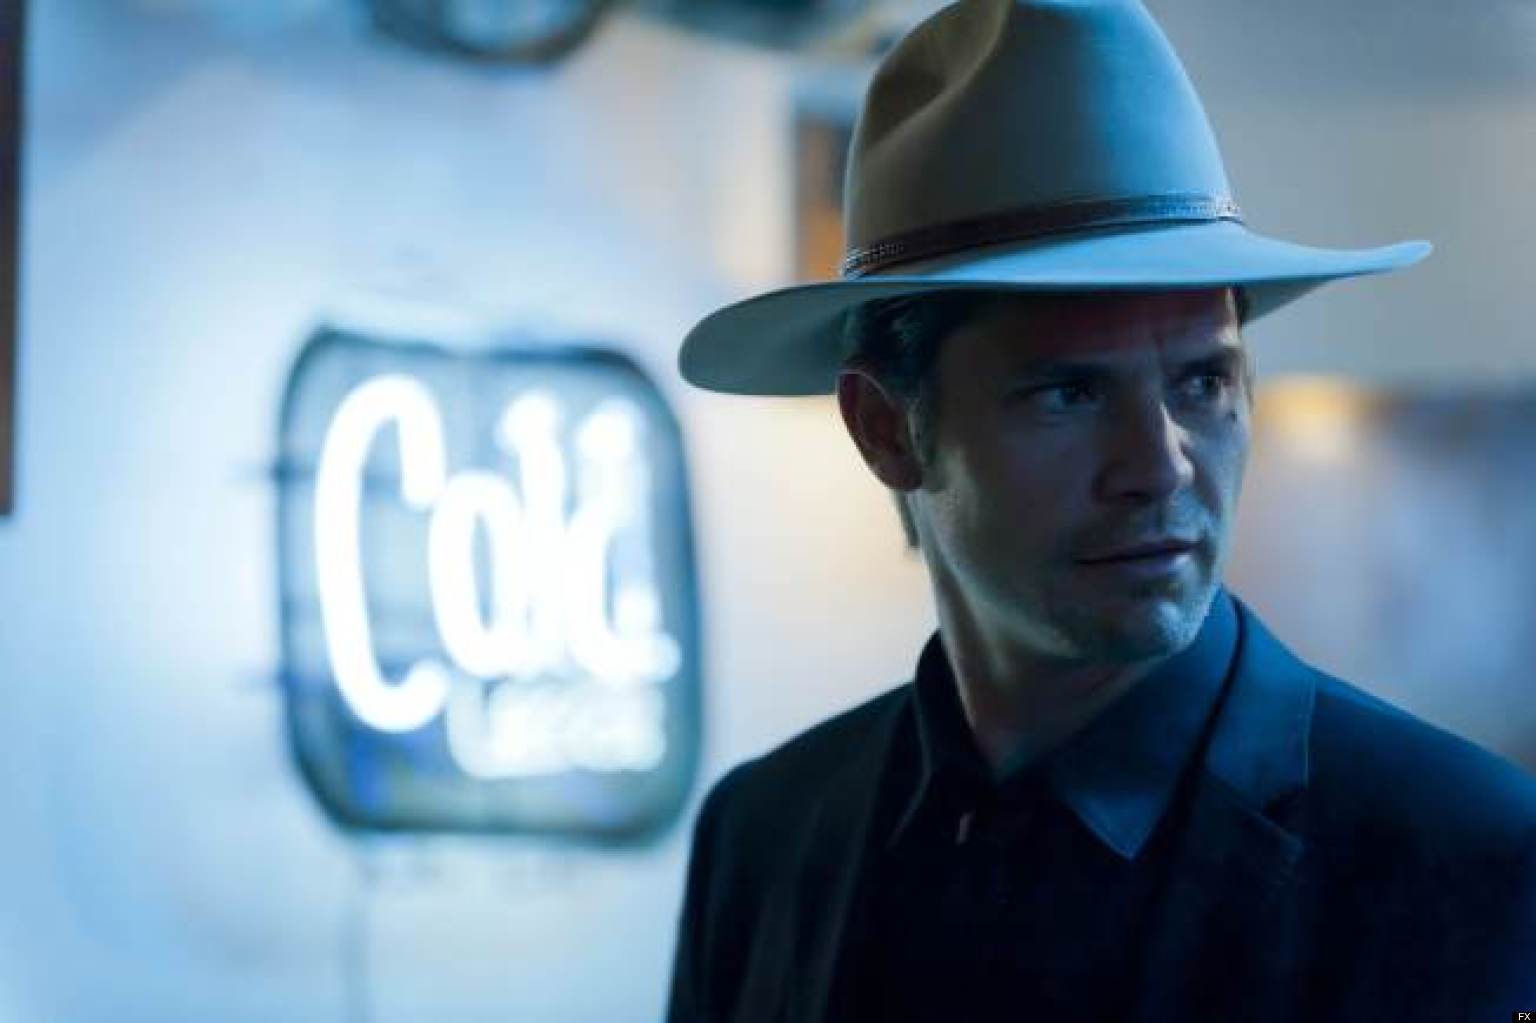 'Justified' Season 4 Trailer Features New Episode Footage, Promises To